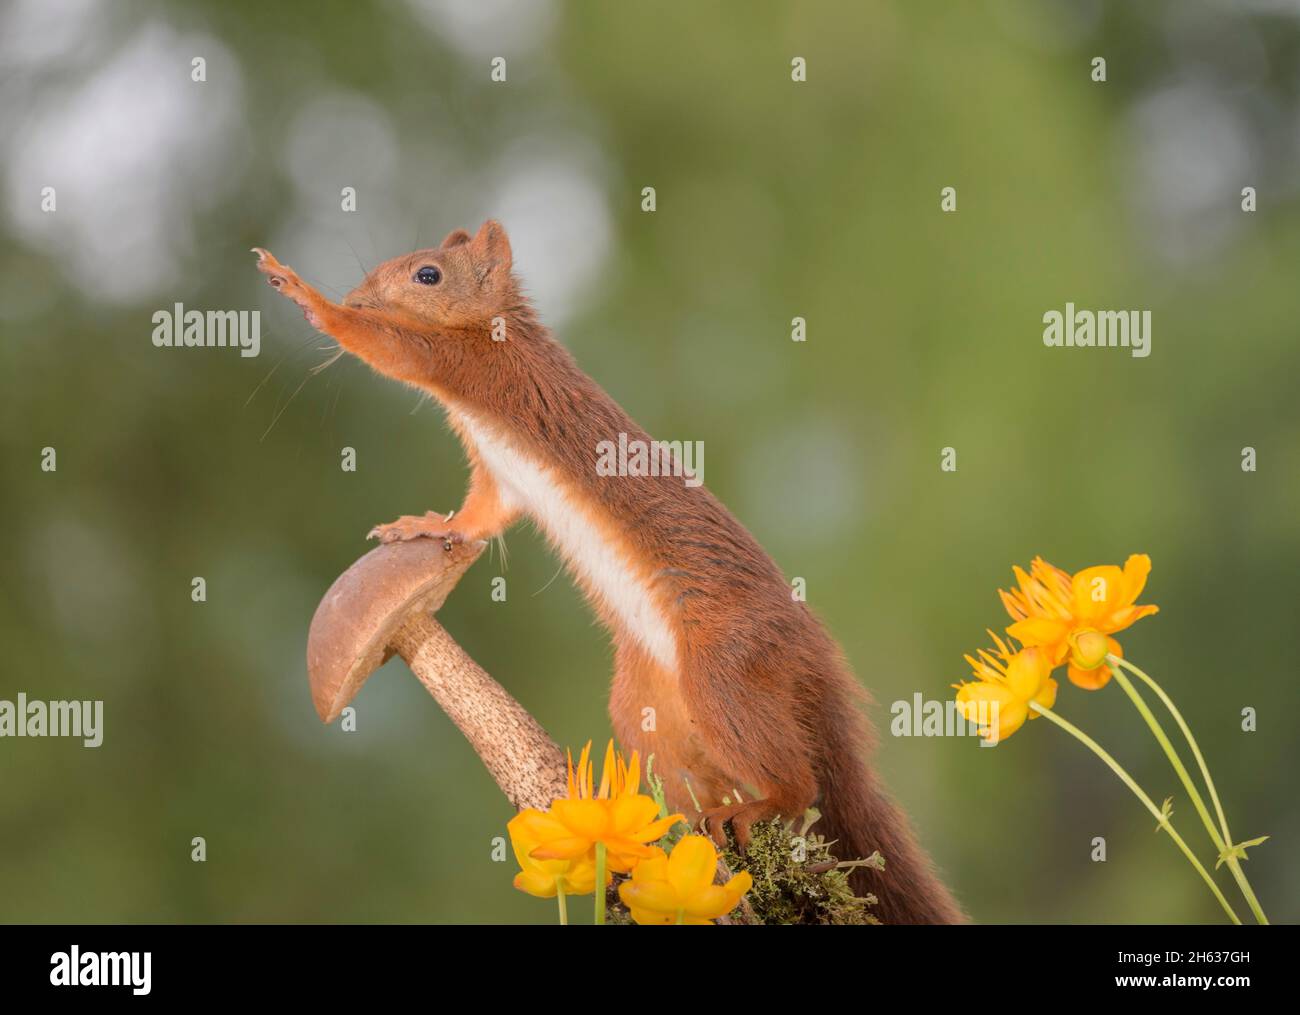 red squirrel touching a mushroom with yellow globeflowers reaching Stock Photo